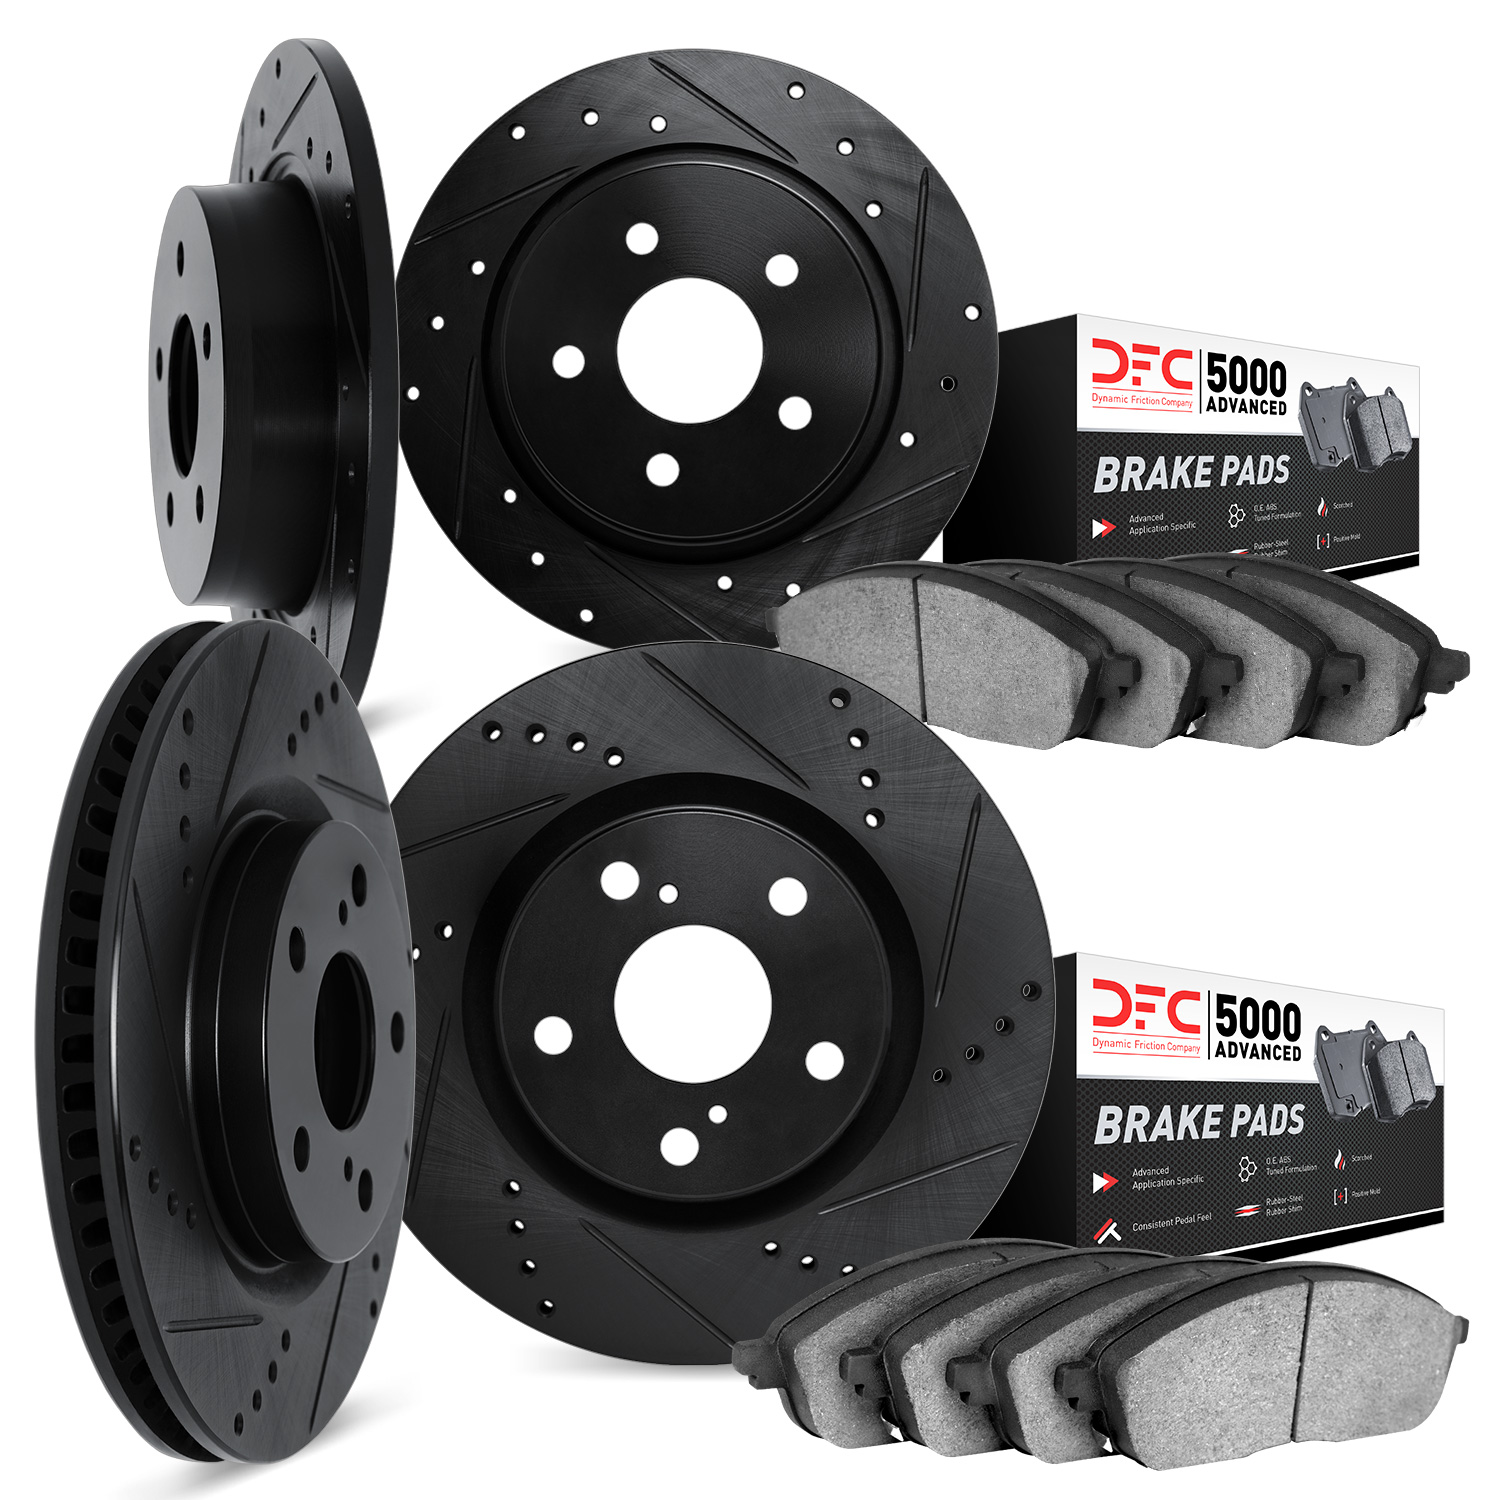 8504-67087 Drilled/Slotted Brake Rotors w/5000 Advanced Brake Pads Kit [Black], 1989-1990 Infiniti/Nissan, Position: Front and R